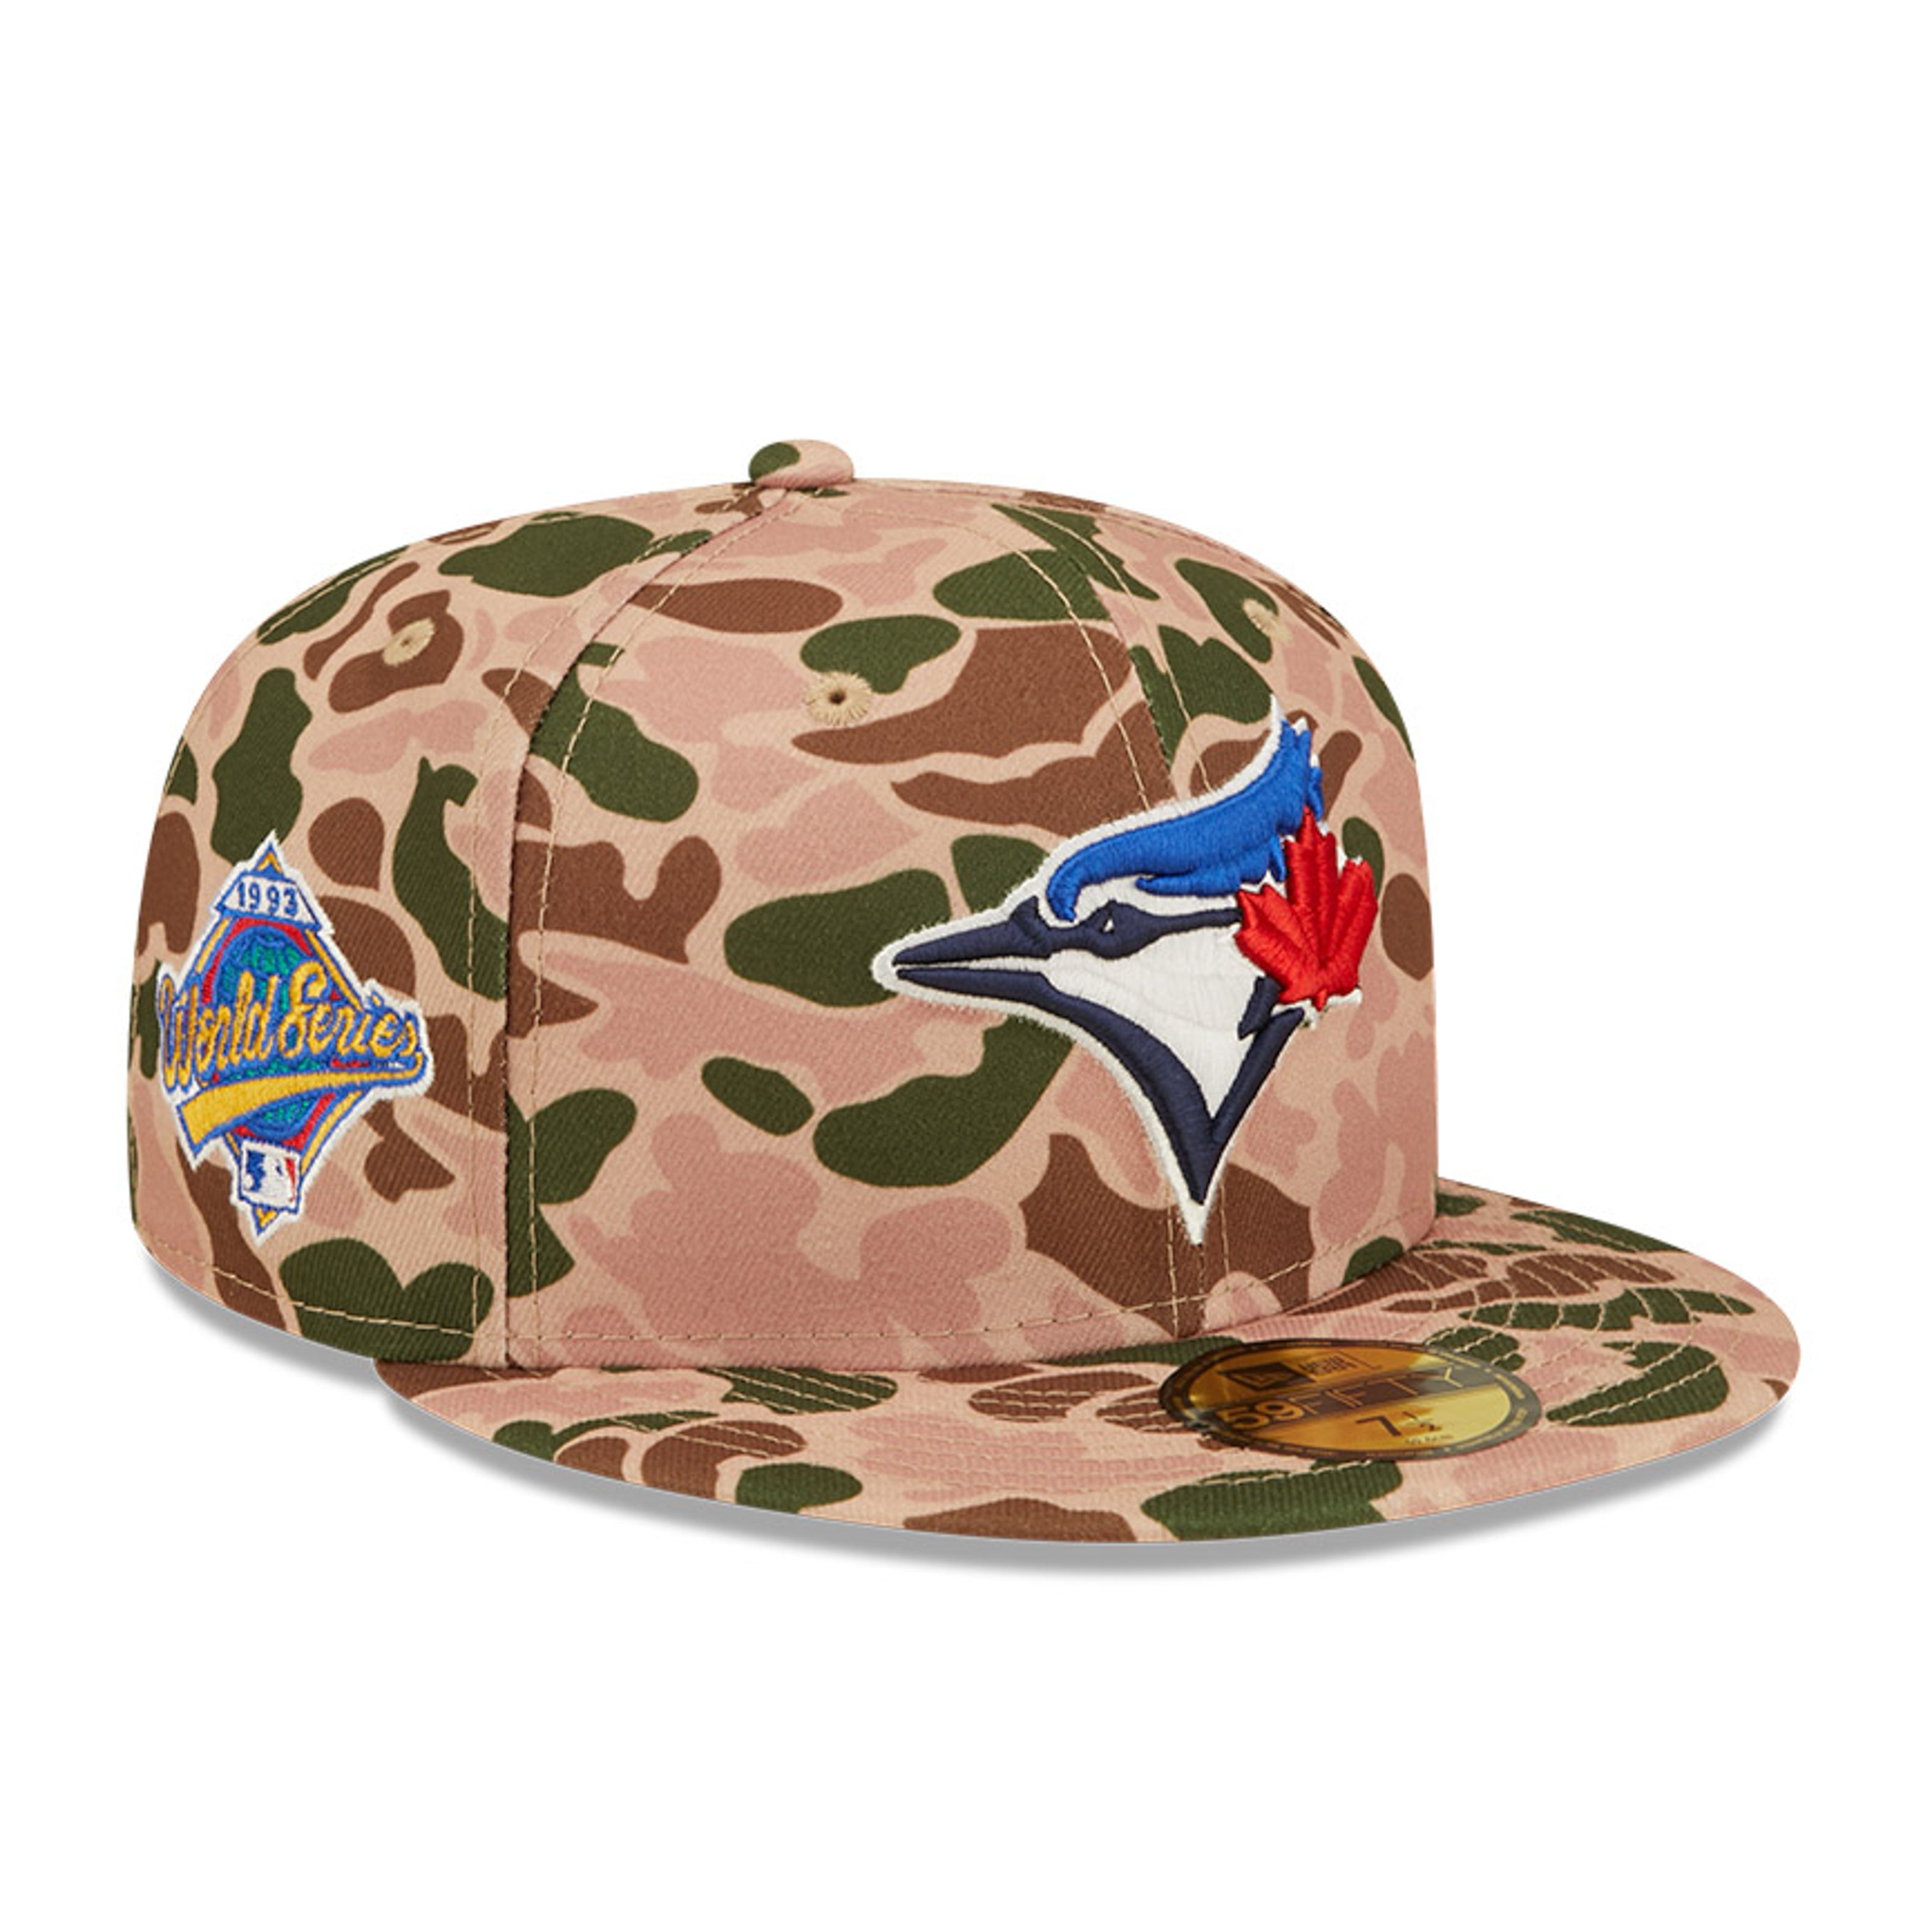 toronto blue jays fitted